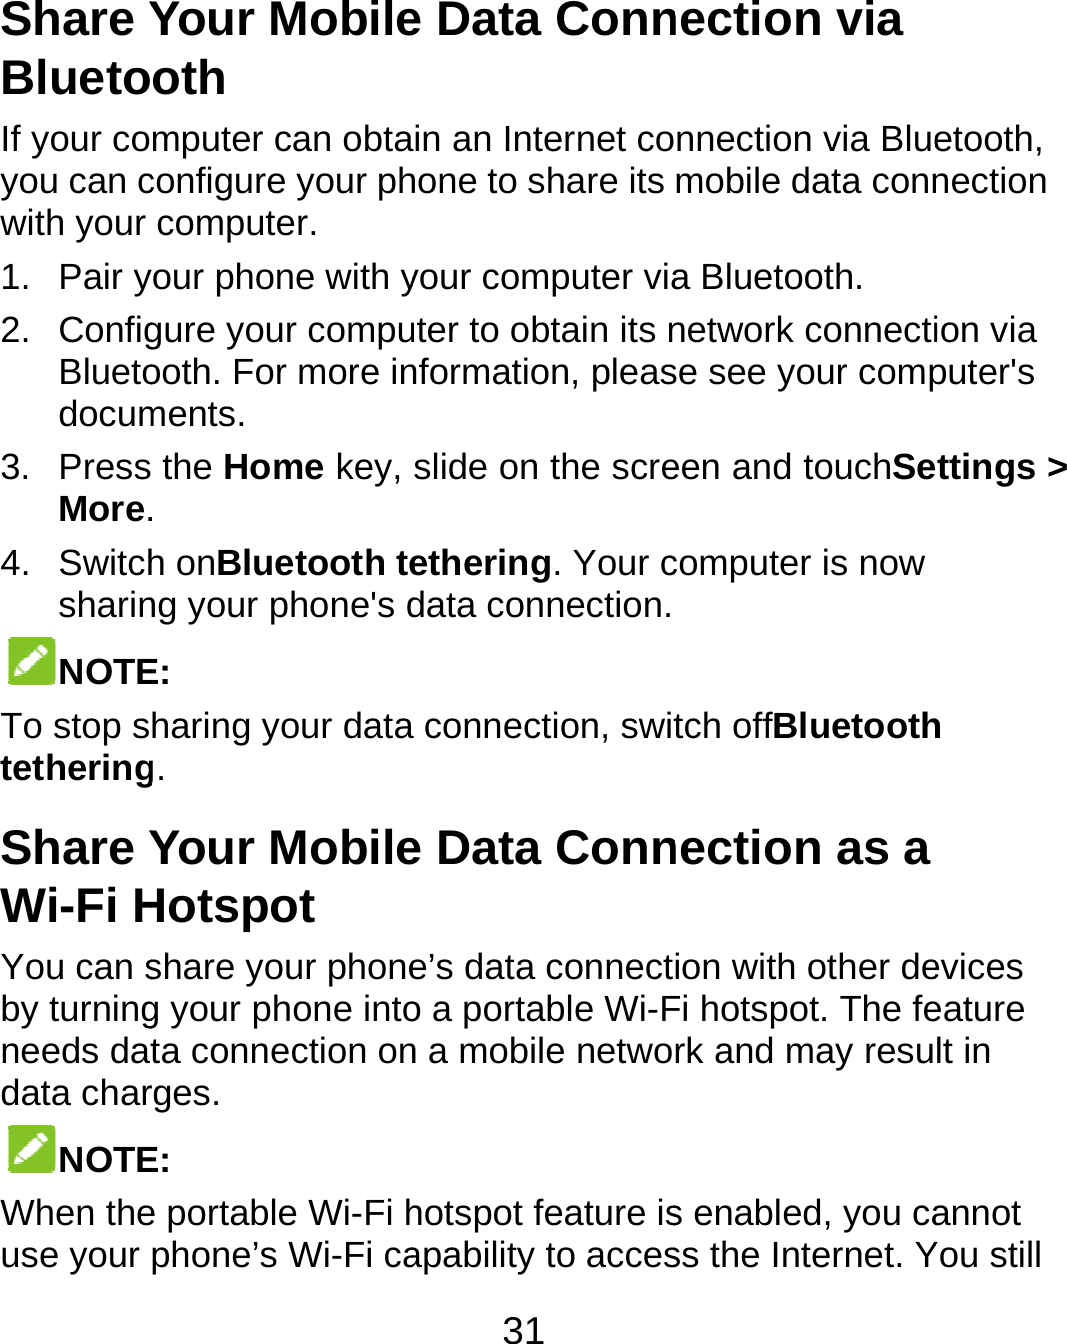  Share YBluetoIf your coyou can cwith your 1. Pair y2. ConfigBluetodocum3. PressMore.4. SwitchsharinNOTETo stop stetheringShare YWi-Fi HYou can sby turningneeds datdata charNOTEWhen theuse your Your Mobileoth mputer can obtaconfigure your phcomputer. our phone with ygure your compuooth. For more inments.  the Home key, . h onBluetooth teng your phone&apos;s dE: haring your datag. Your MobileHotspot share your phoneg your phone intota connection onrges. E:  e portable Wi-Fi hphone’s Wi-Fi ca31 e Data Connin an Internet cohone to share its your computer viauter to obtain its nnformation, pleasslide on the screethering. Your cdata connection. connection, swite Data Conne’s data connecto a portable Wi-Fn a mobile netwohotspot feature isapability to accesnection via nnection via Bluemobile data conna Bluetooth. network connectise see your compeen and touchSecomputer is now tch offBluetoothnection as a ion with other deFi hotspot. The ferk and may resus enabled, you cass the Internet. Yetooth, nection ion via puter&apos;s ettings &gt; h evices eature lt in annot You still 